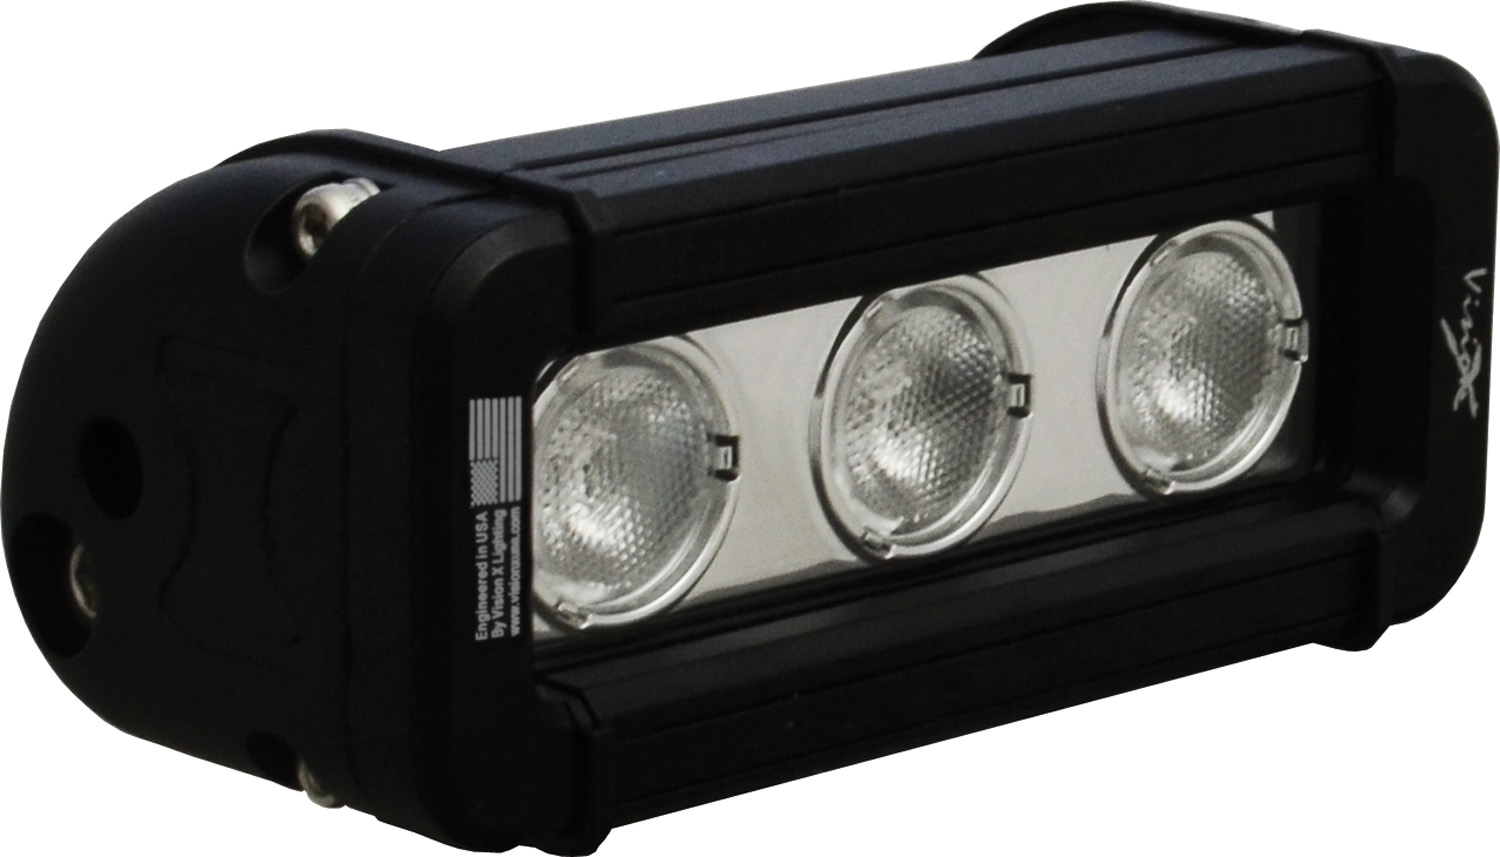 5" XMITTER LOW PROFILE BLACK 3 3W LED'S 40?? WIDE